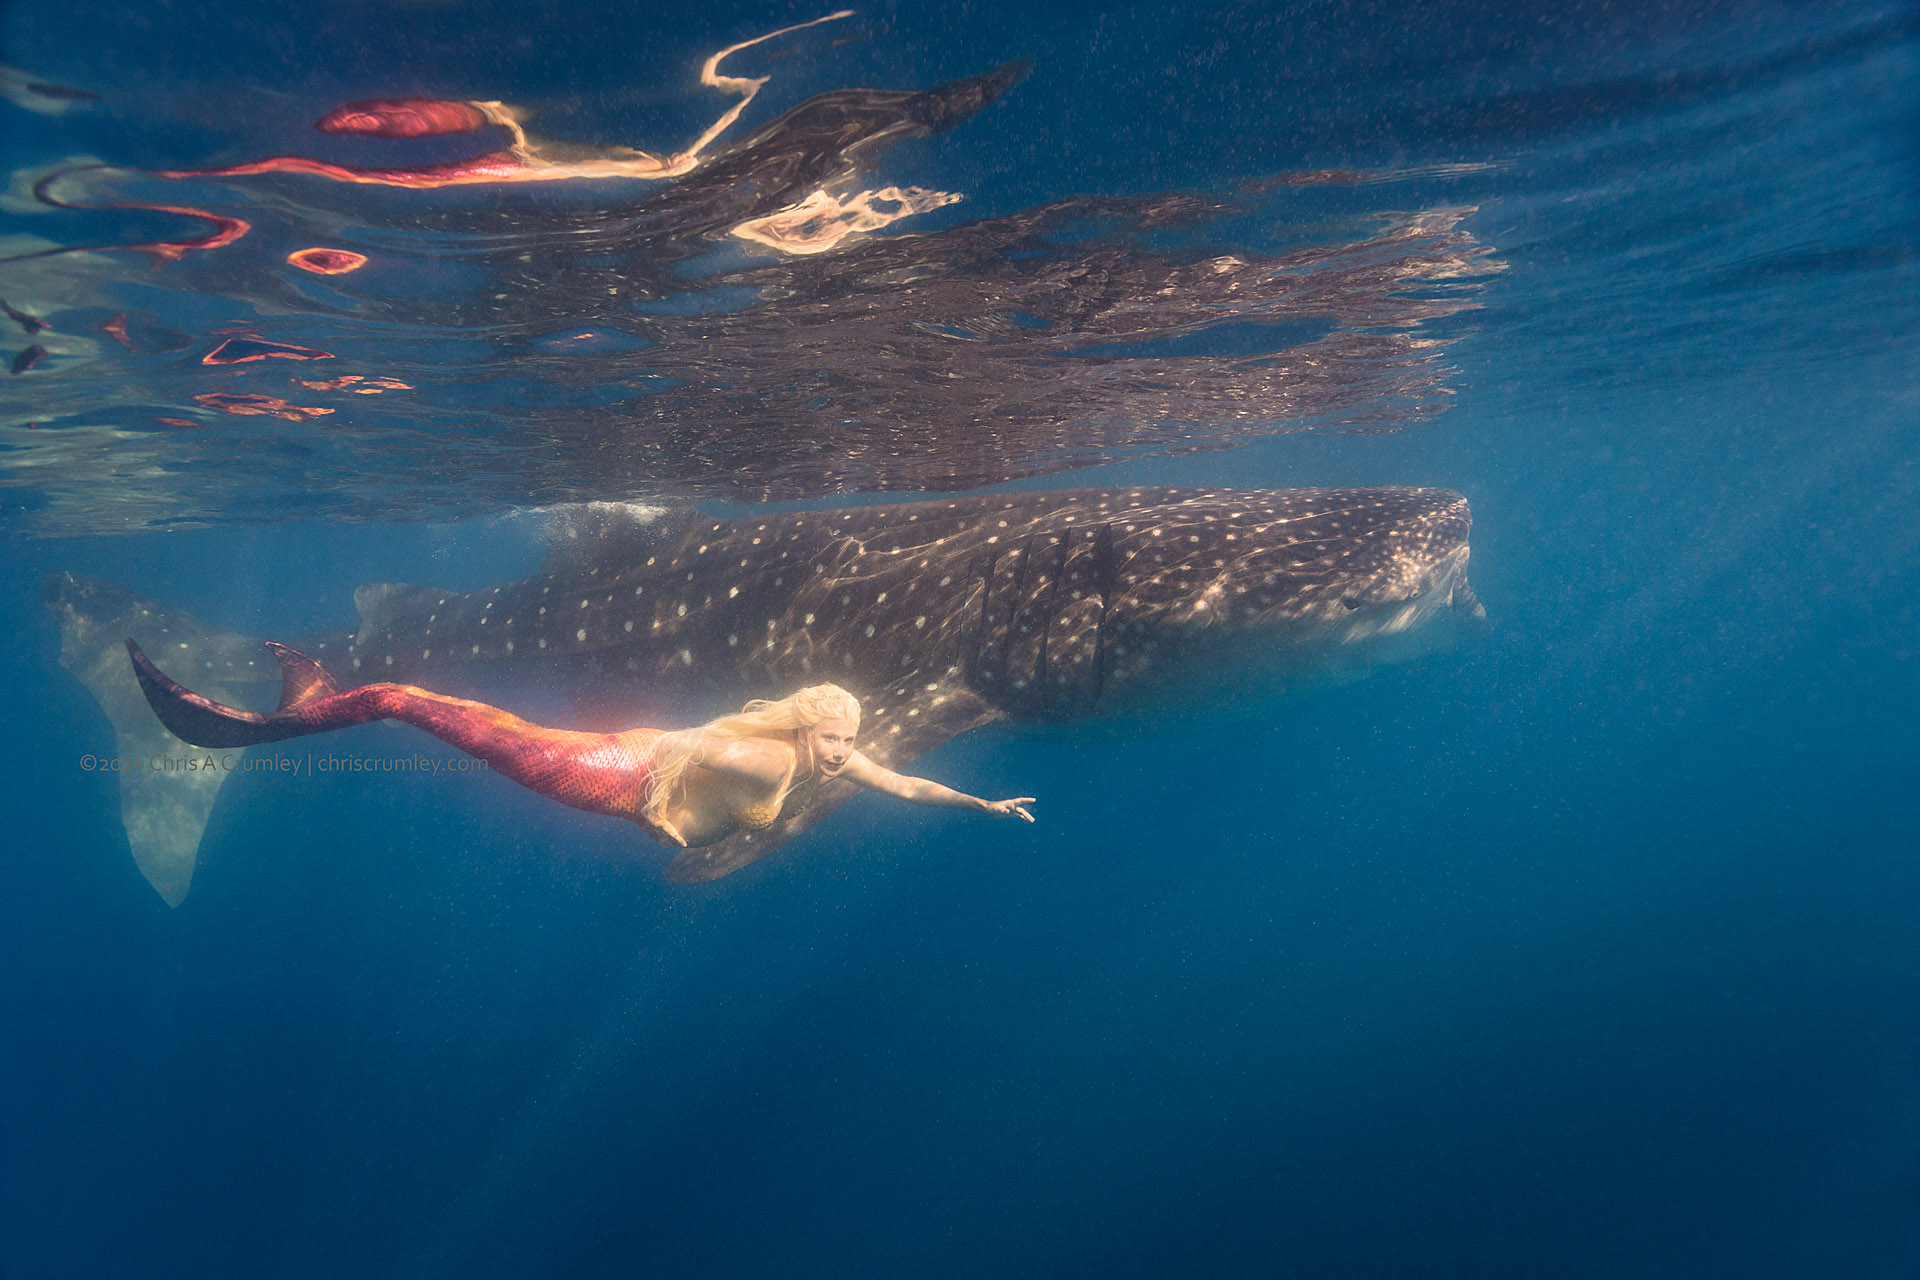 Pregnant Mermaid swimming with Whale Shark, Isla Mujeres, Mexico